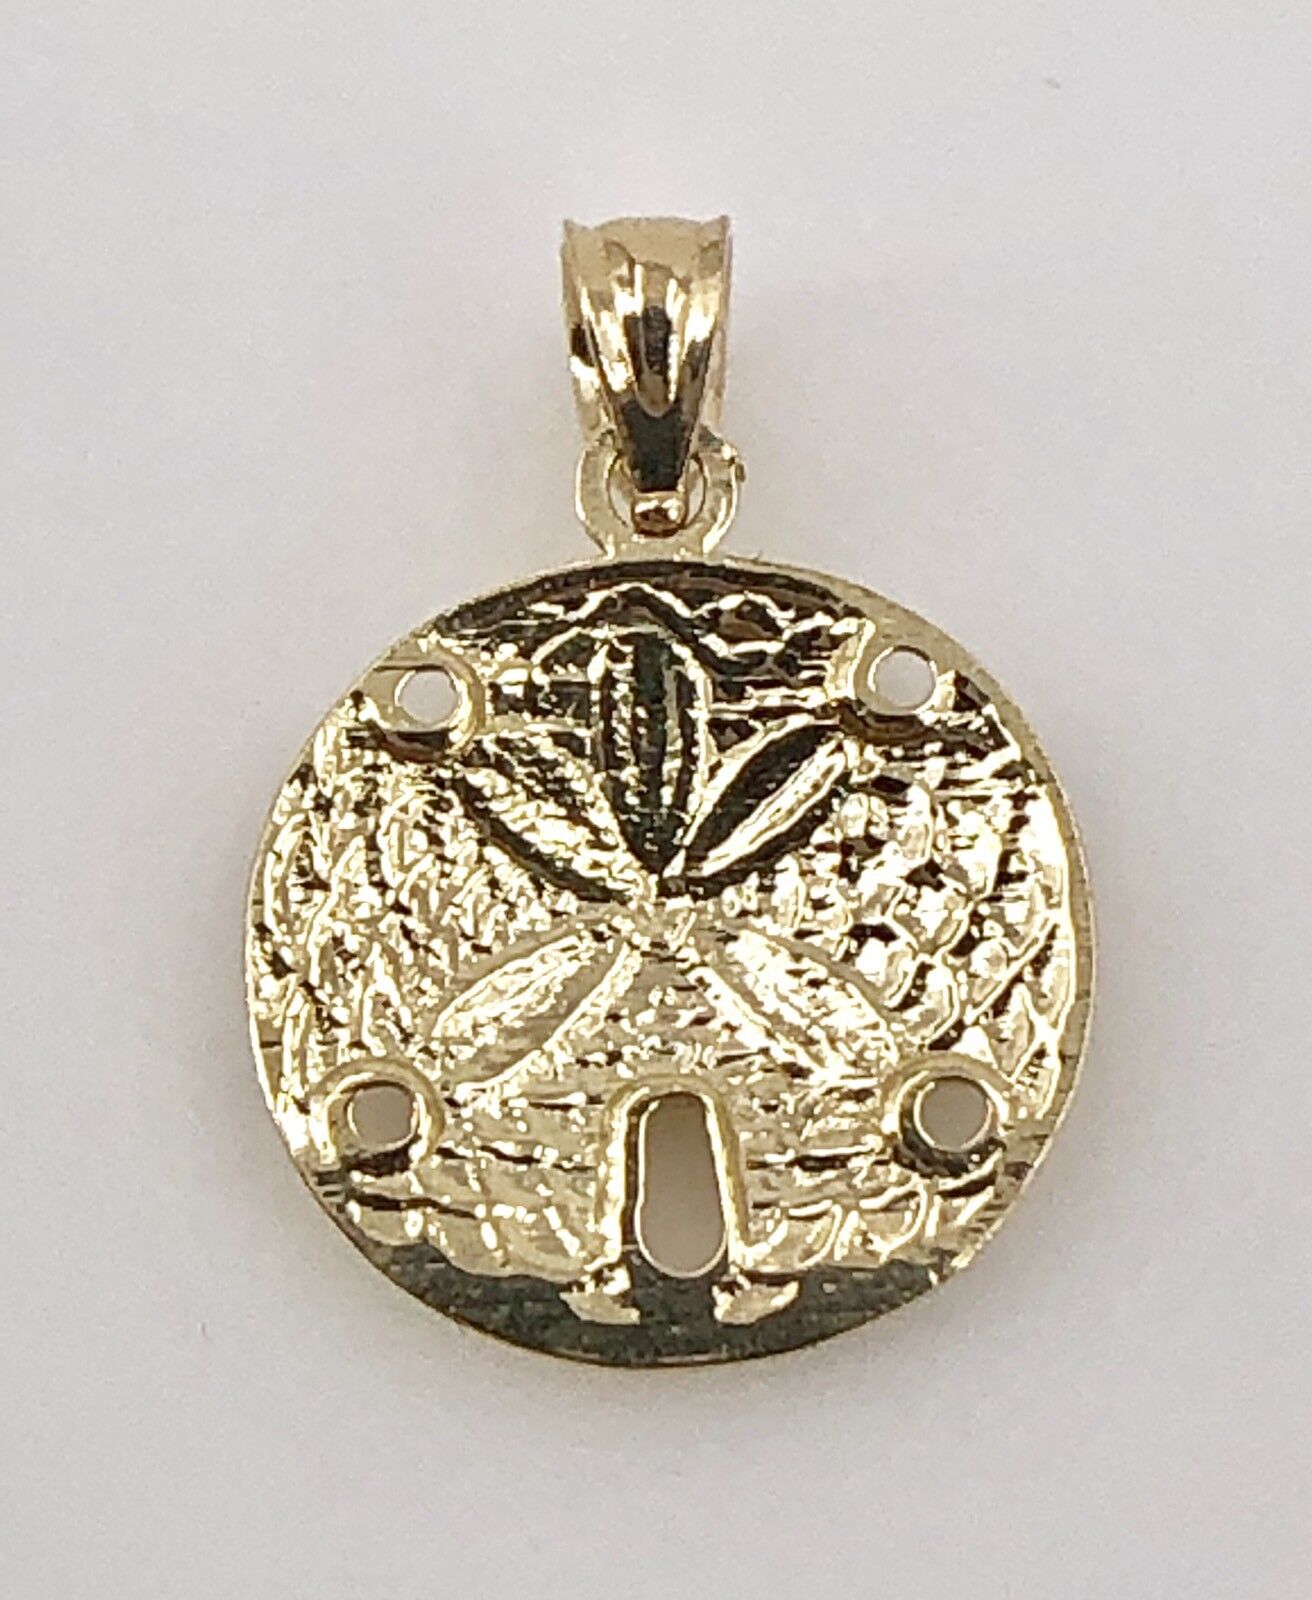 Sand Dolllar Solid 14K Yellow Gold 2-Sided Charm/Pendant, New